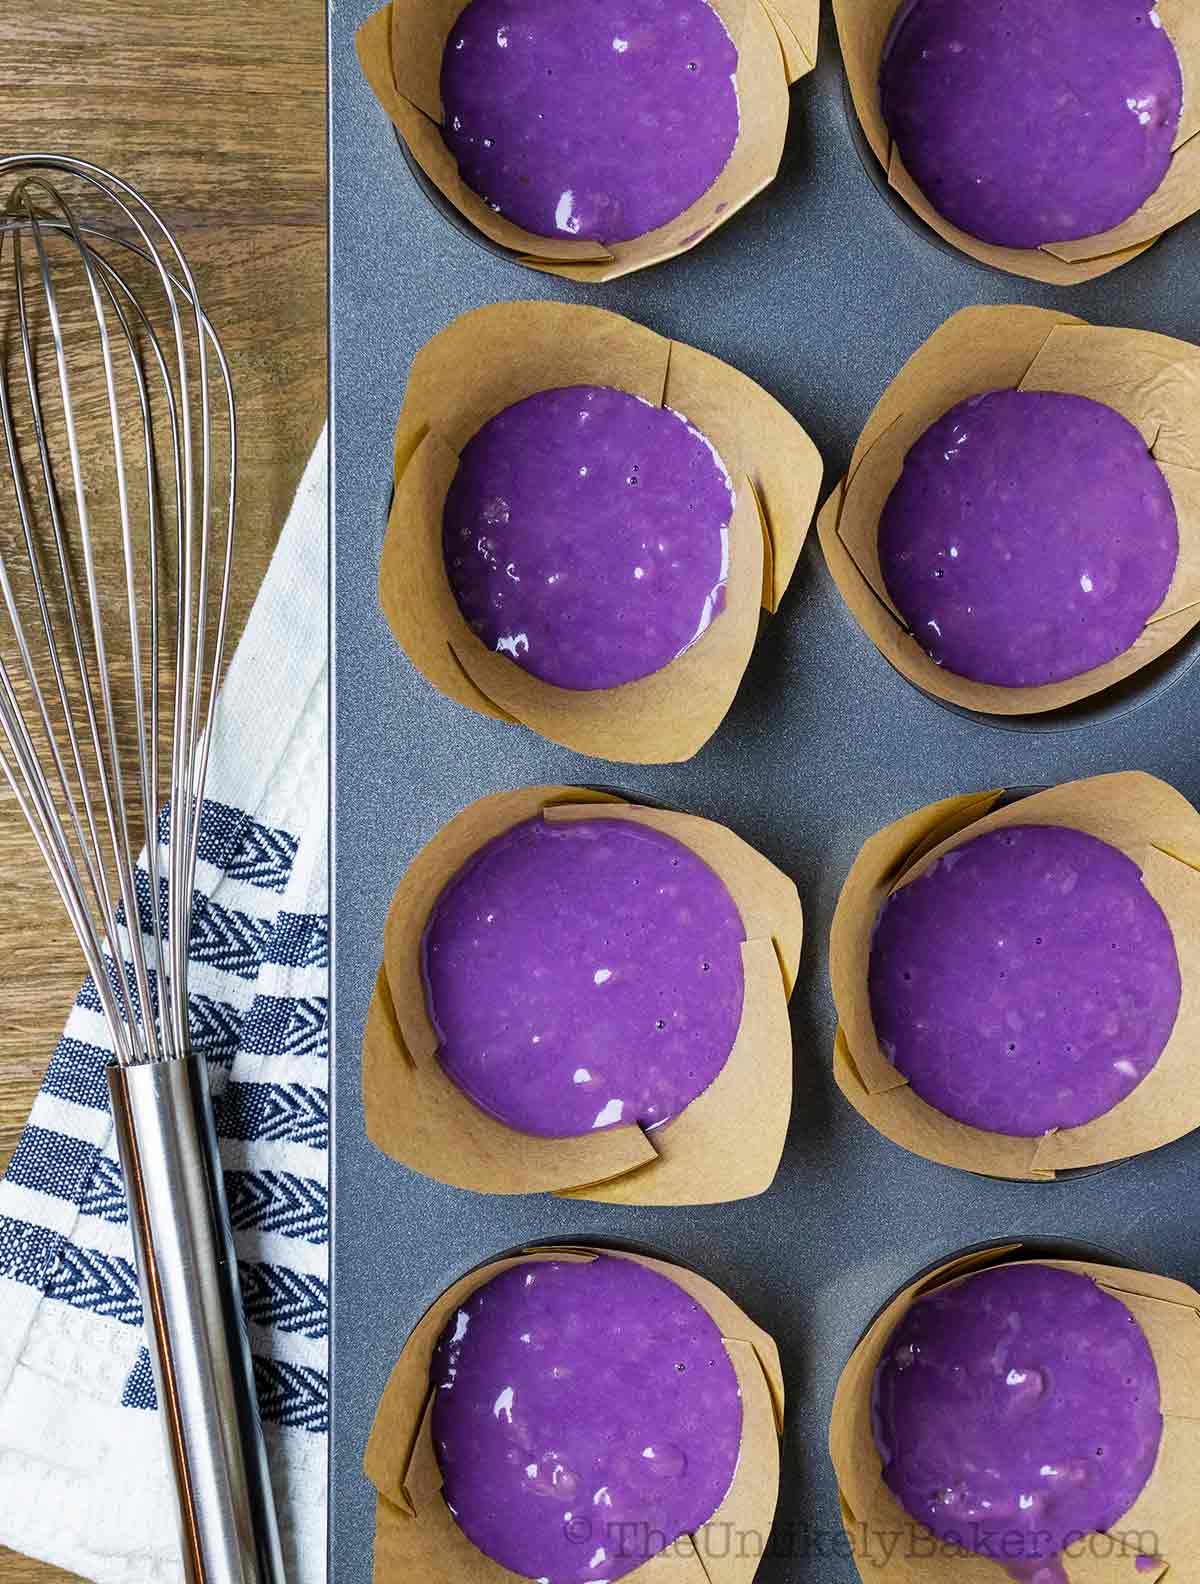 Ube Muffins Recipe (step-by-step photos) - The Unlikely Baker